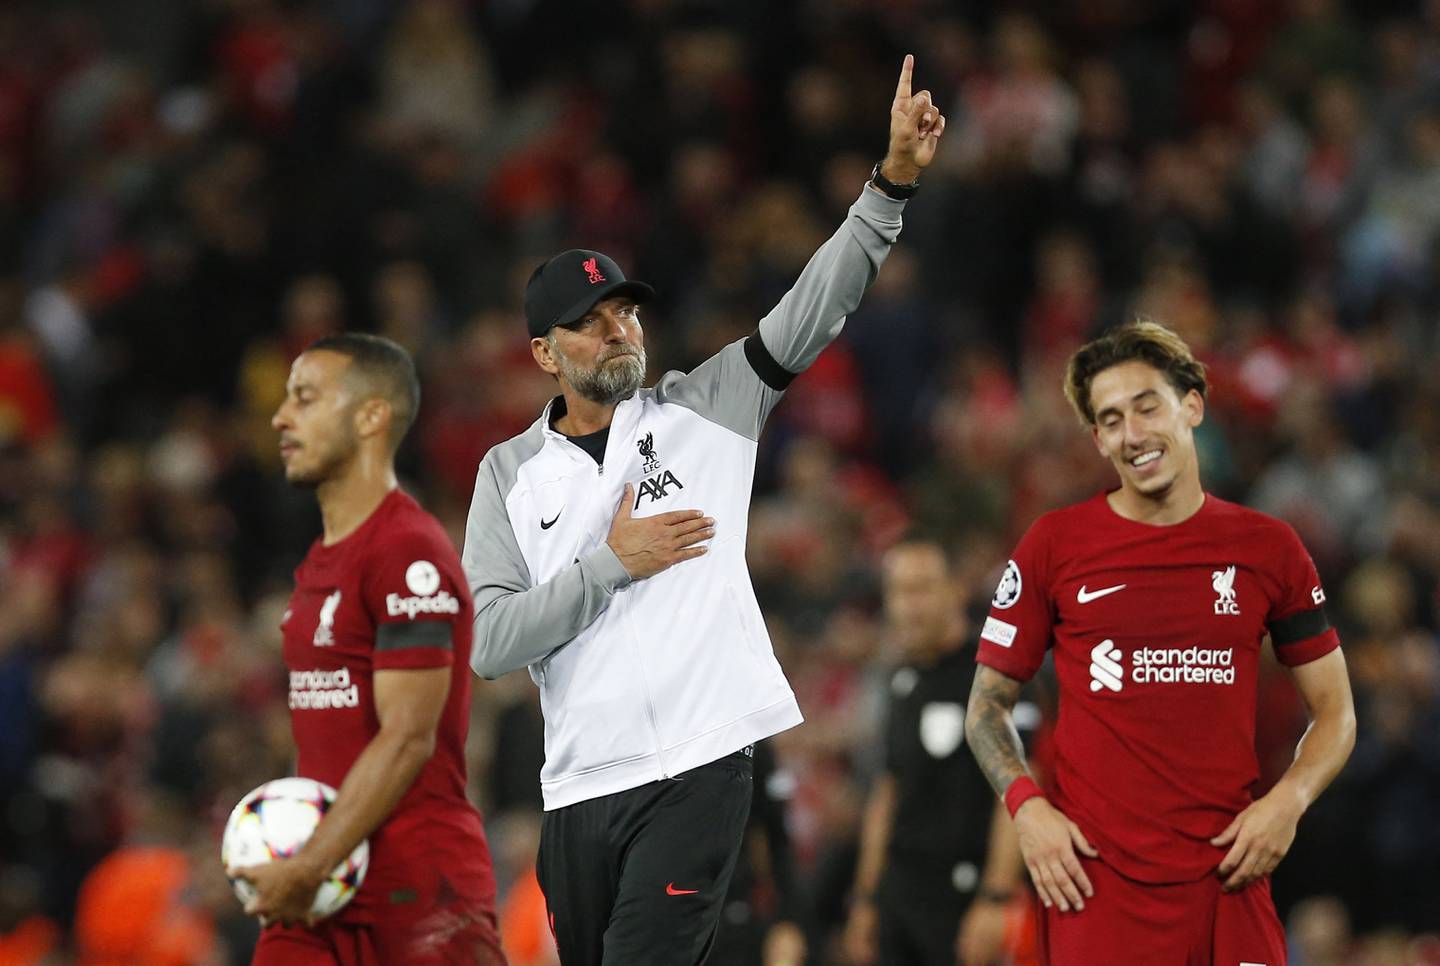 Liverpool manager Jurgen Klopp salutes the crowd after the Champions League win over Ajax. Reuters